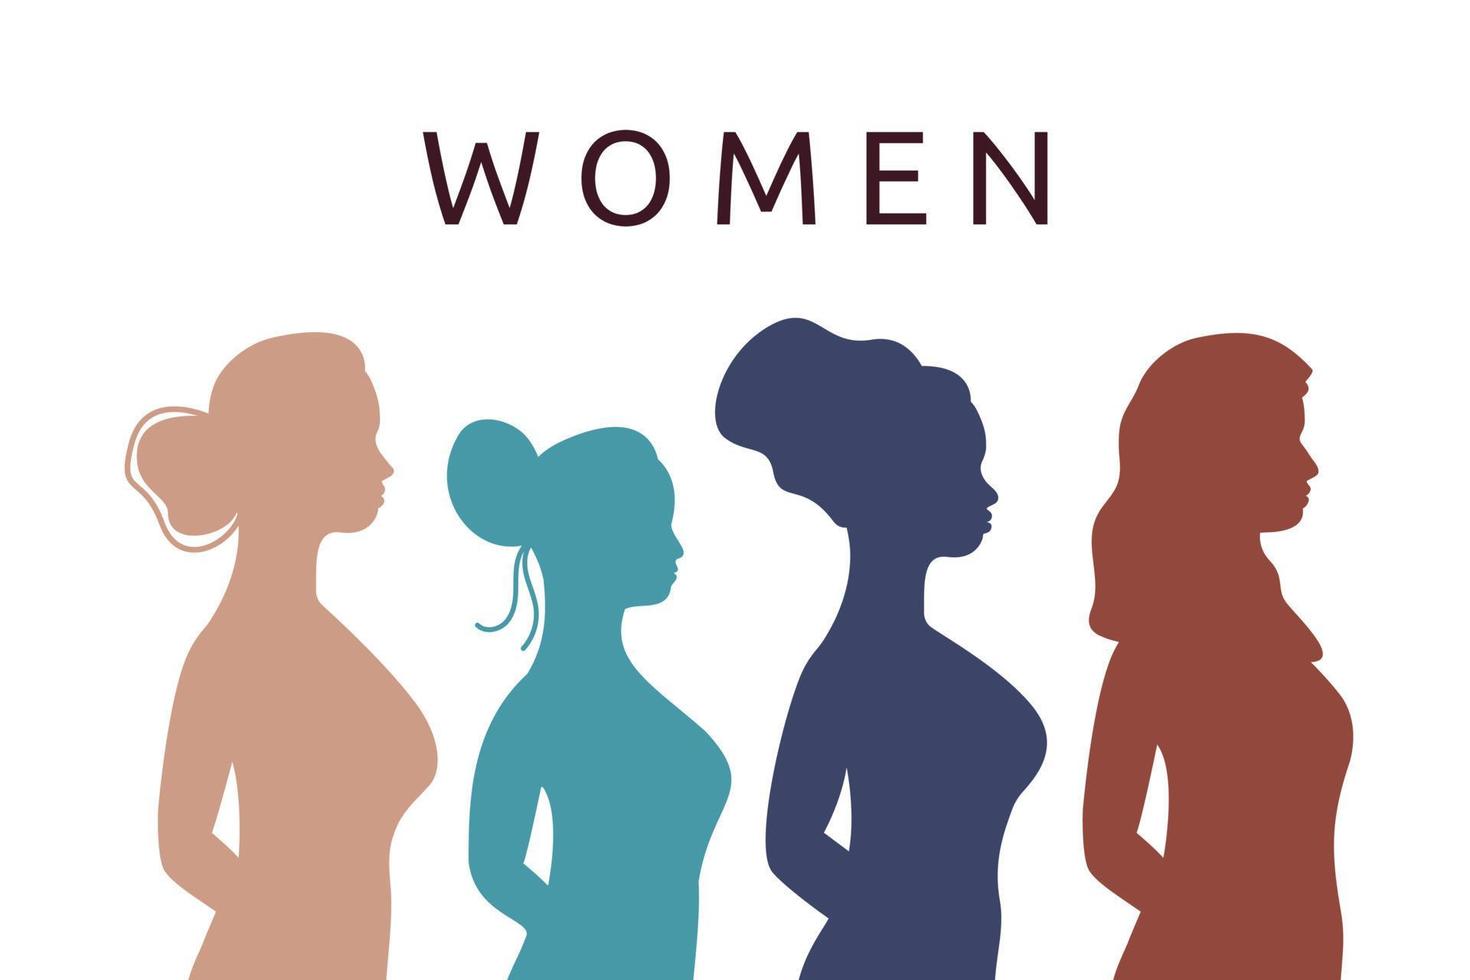 Female silhouettes in profile. Group of women of different ethnicities and cultures together. Women text. Vector flat illustration